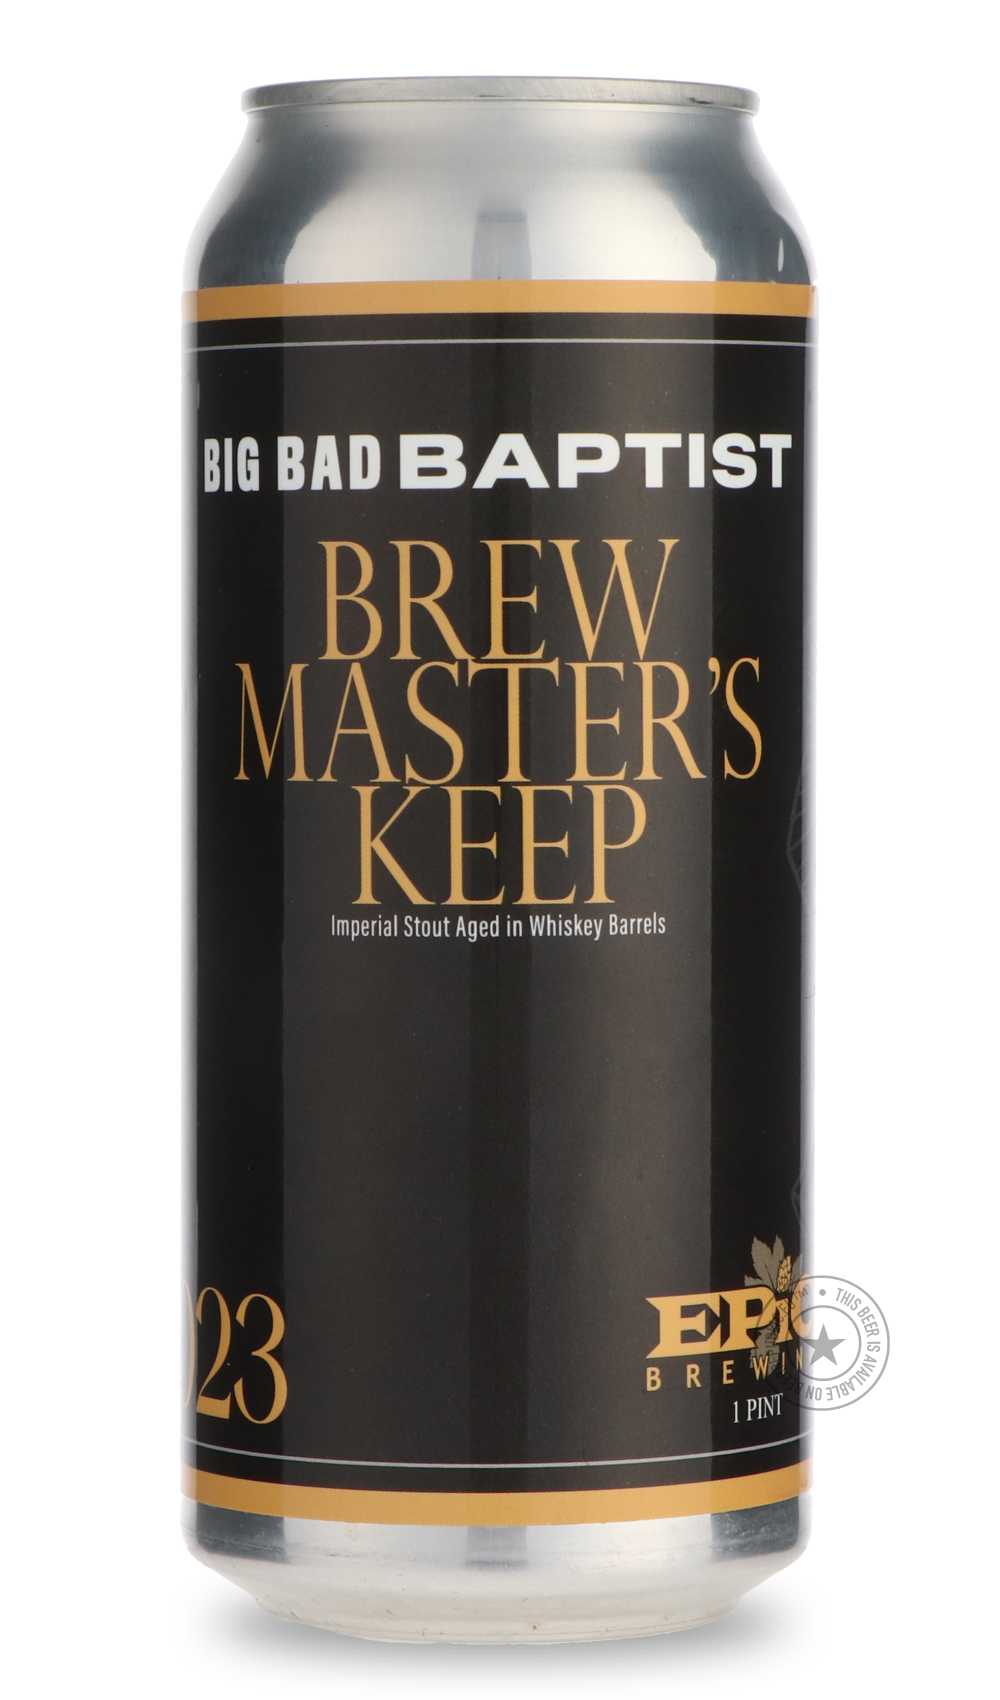 -Epic- Big Bad Baptist Brewmasters Keep-Stout & Porter- Only @ Beer Republic - The best online beer store for American & Canadian craft beer - Buy beer online from the USA and Canada - Bier online kopen - Amerikaans bier kopen - Craft beer store - Craft beer kopen - Amerikanisch bier kaufen - Bier online kaufen - Acheter biere online - IPA - Stout - Porter - New England IPA - Hazy IPA - Imperial Stout - Barrel Aged - Barrel Aged Imperial Stout - Brown - Dark beer - Blond - Blonde - Pilsner - Lager - Wheat -